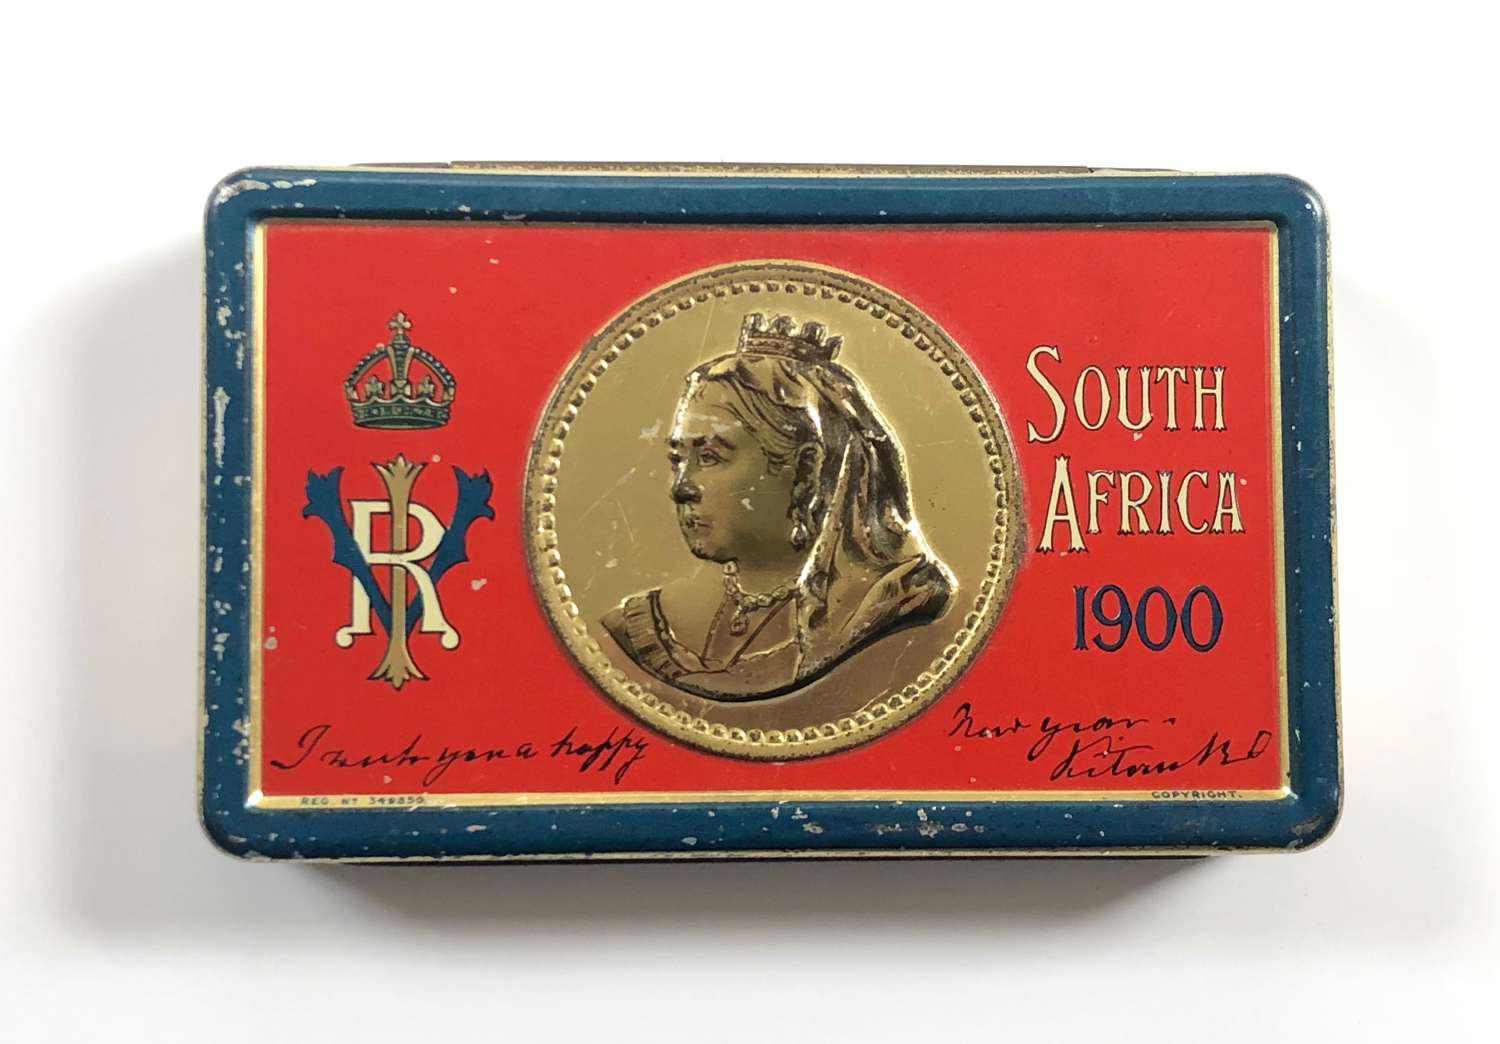 Boer War Christmas chocolate tin and contents by Rowntrees